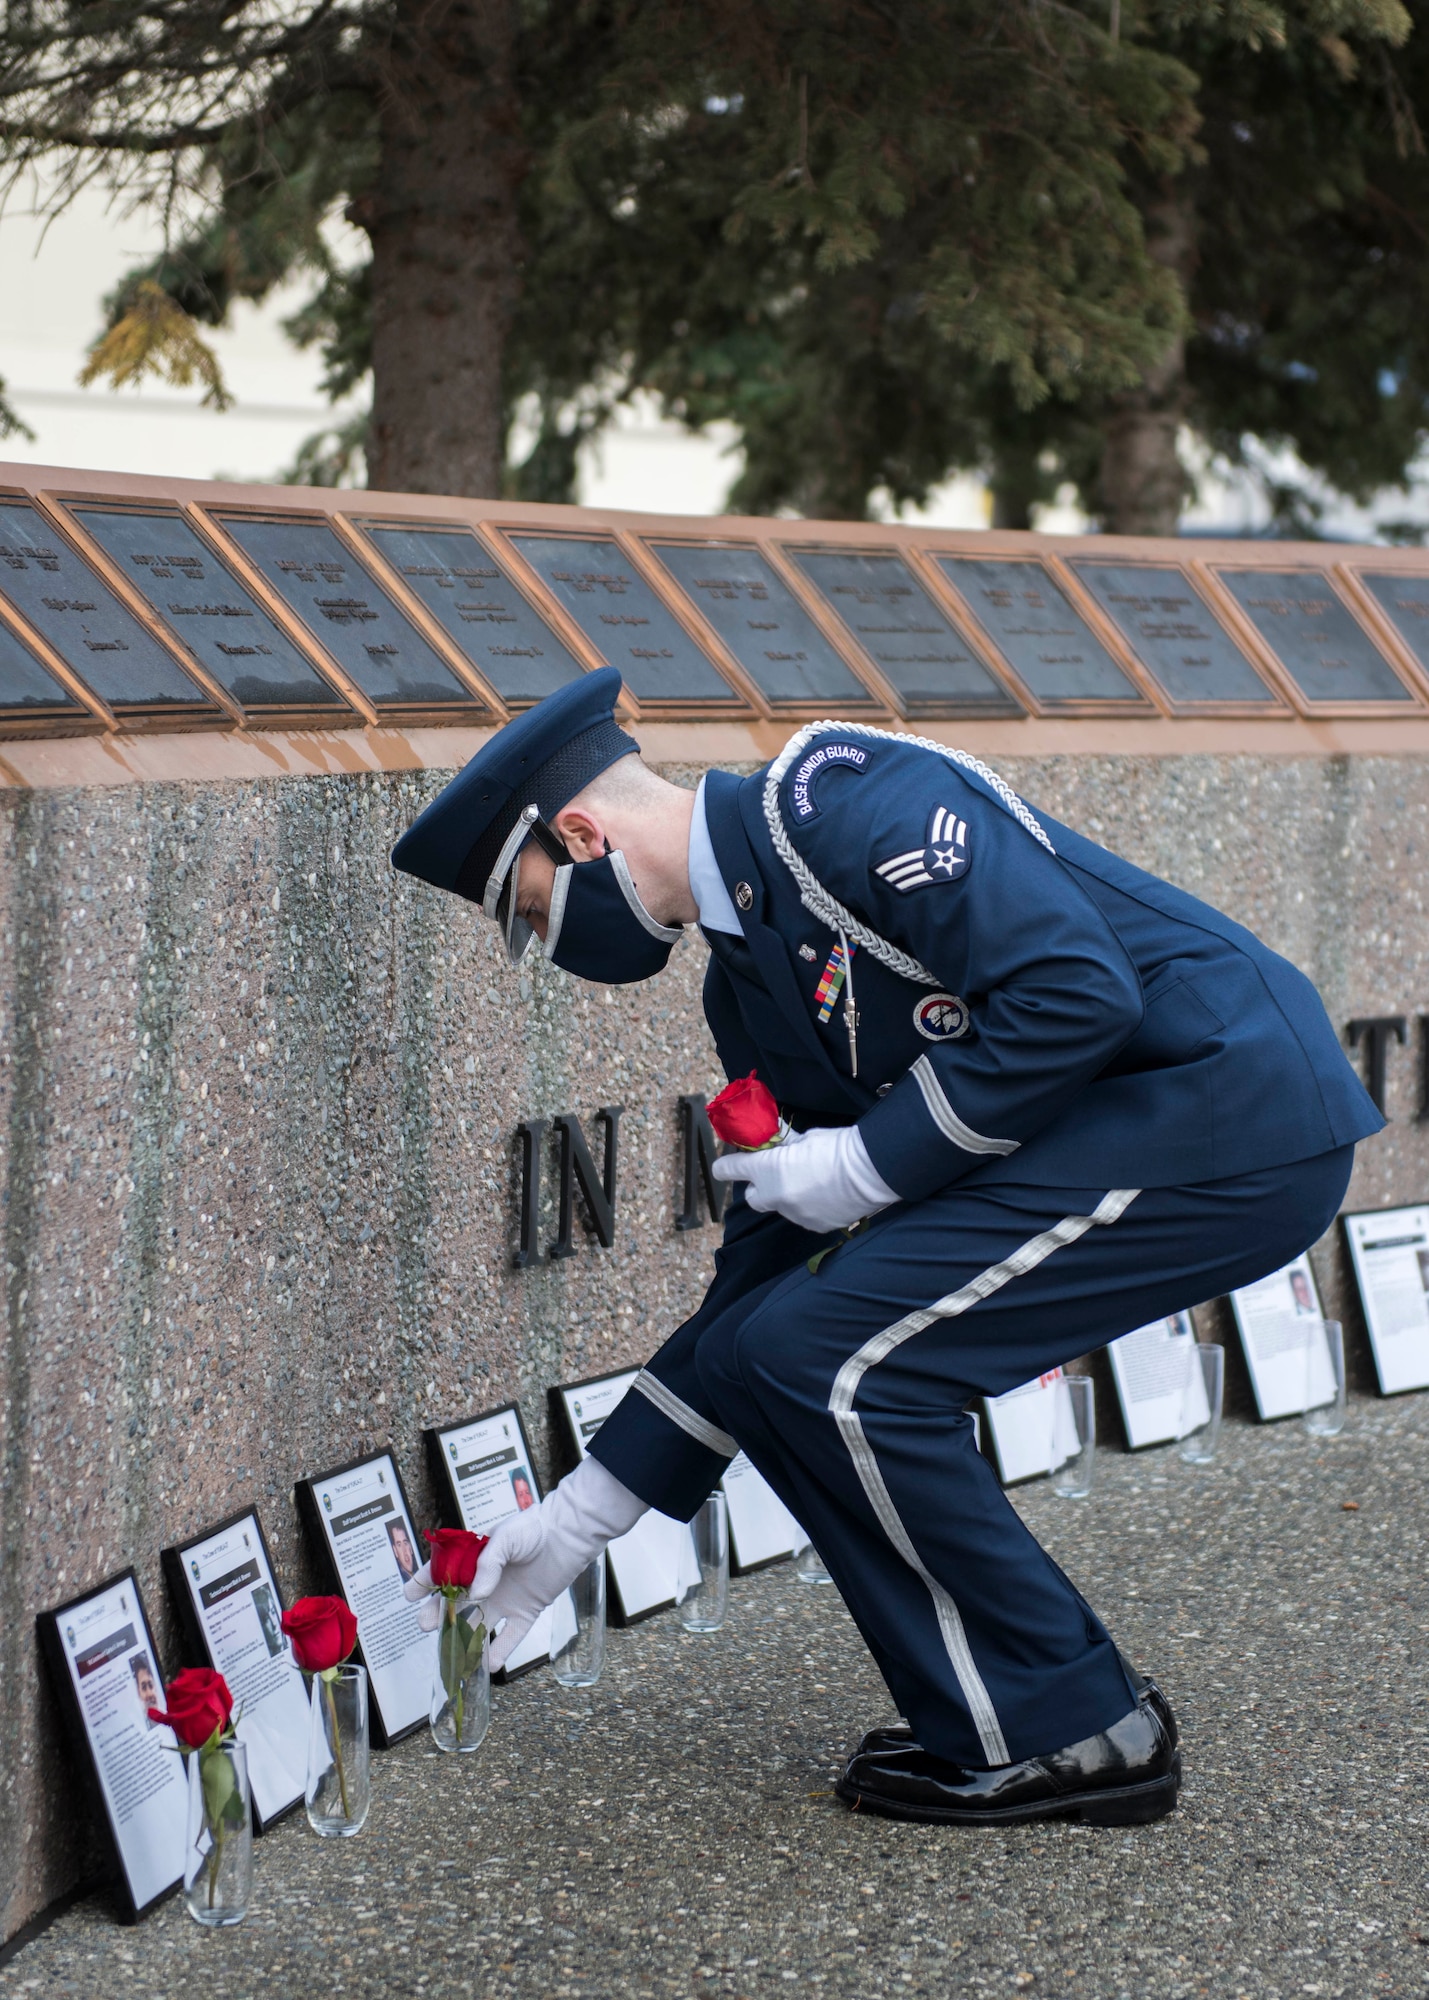 A U.S. Air Force Honor Guard member places a rose in front of a memorial for one of the lost crew members at the Yukla 27 25th anniversary memorial ceremony at Joint Base Elmendorf-Richardson, Alaska, Sept. 22, 2020. Yukla 27, a U.S. Air Force E-3 Sentry airborne warning and control system aircraft assigned to the 962nd AACS, encountered a flock of geese Sept. 22, 1995, and crashed shortly after takeoff on a routine surveillance training sortie, killing all 24 Canadian and U.S. Airmen aboard.